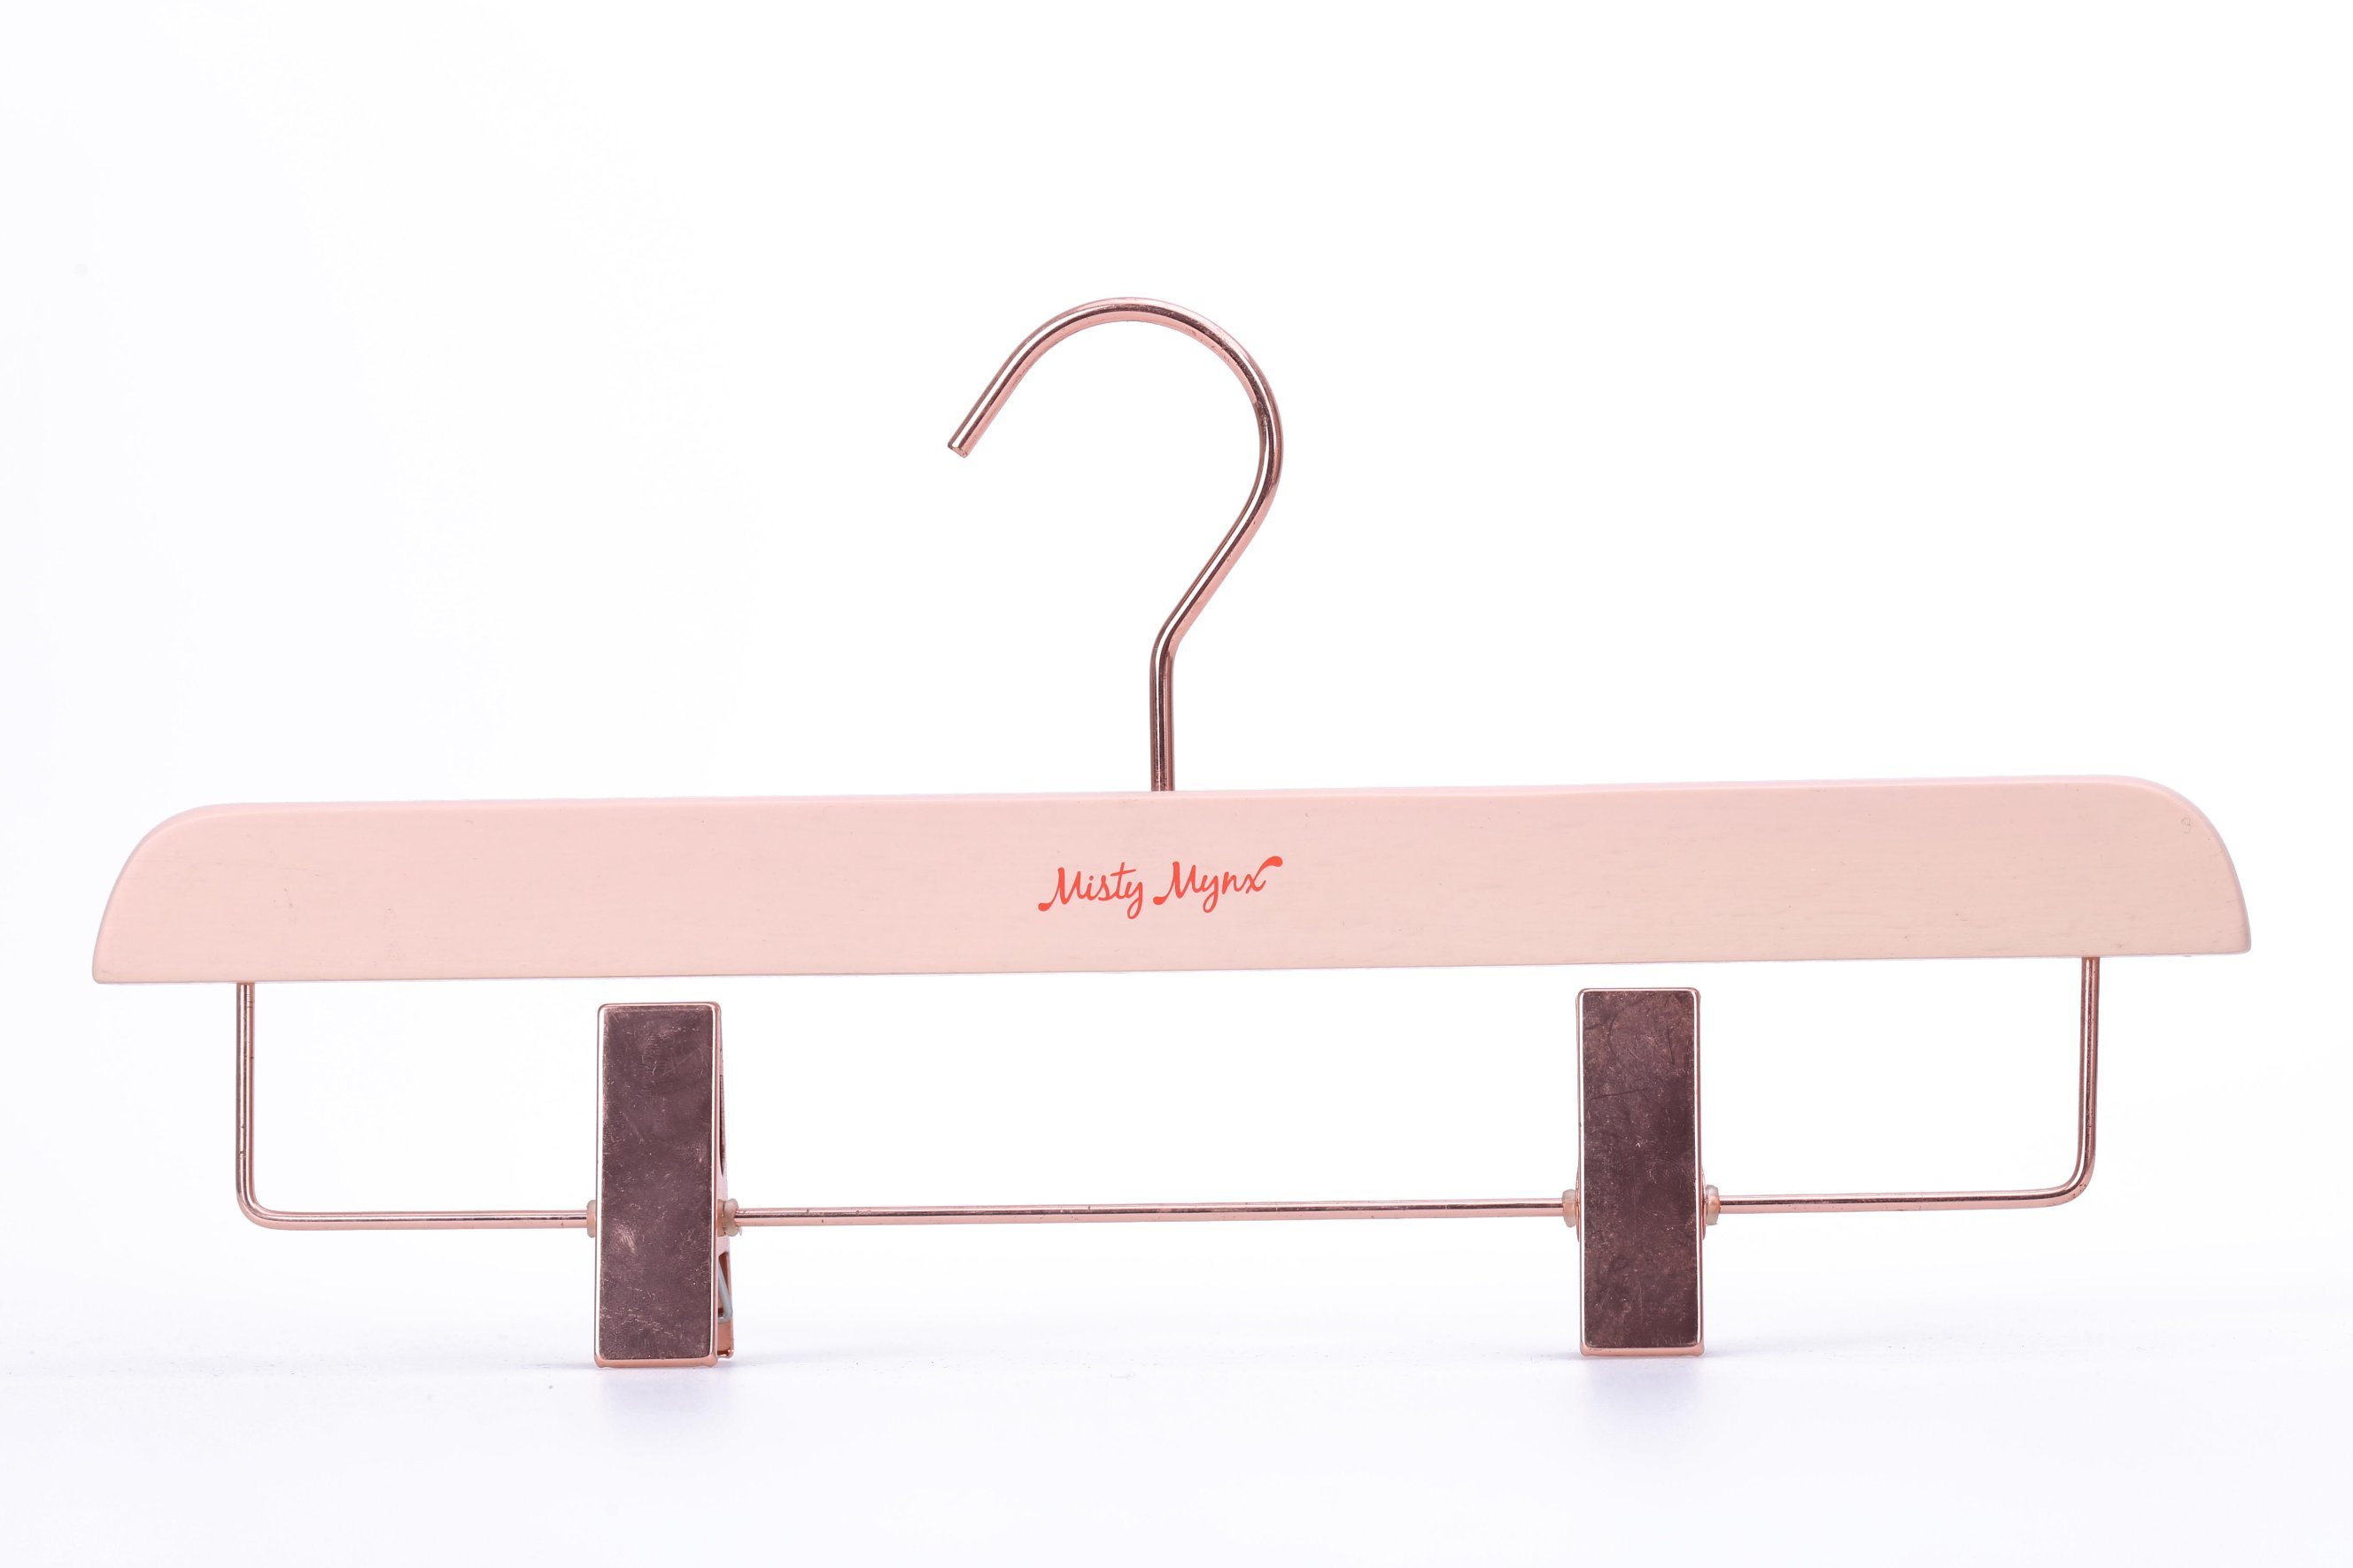 The Newest Hot Sale Luxury Wooden Trouser Hanger with Clip